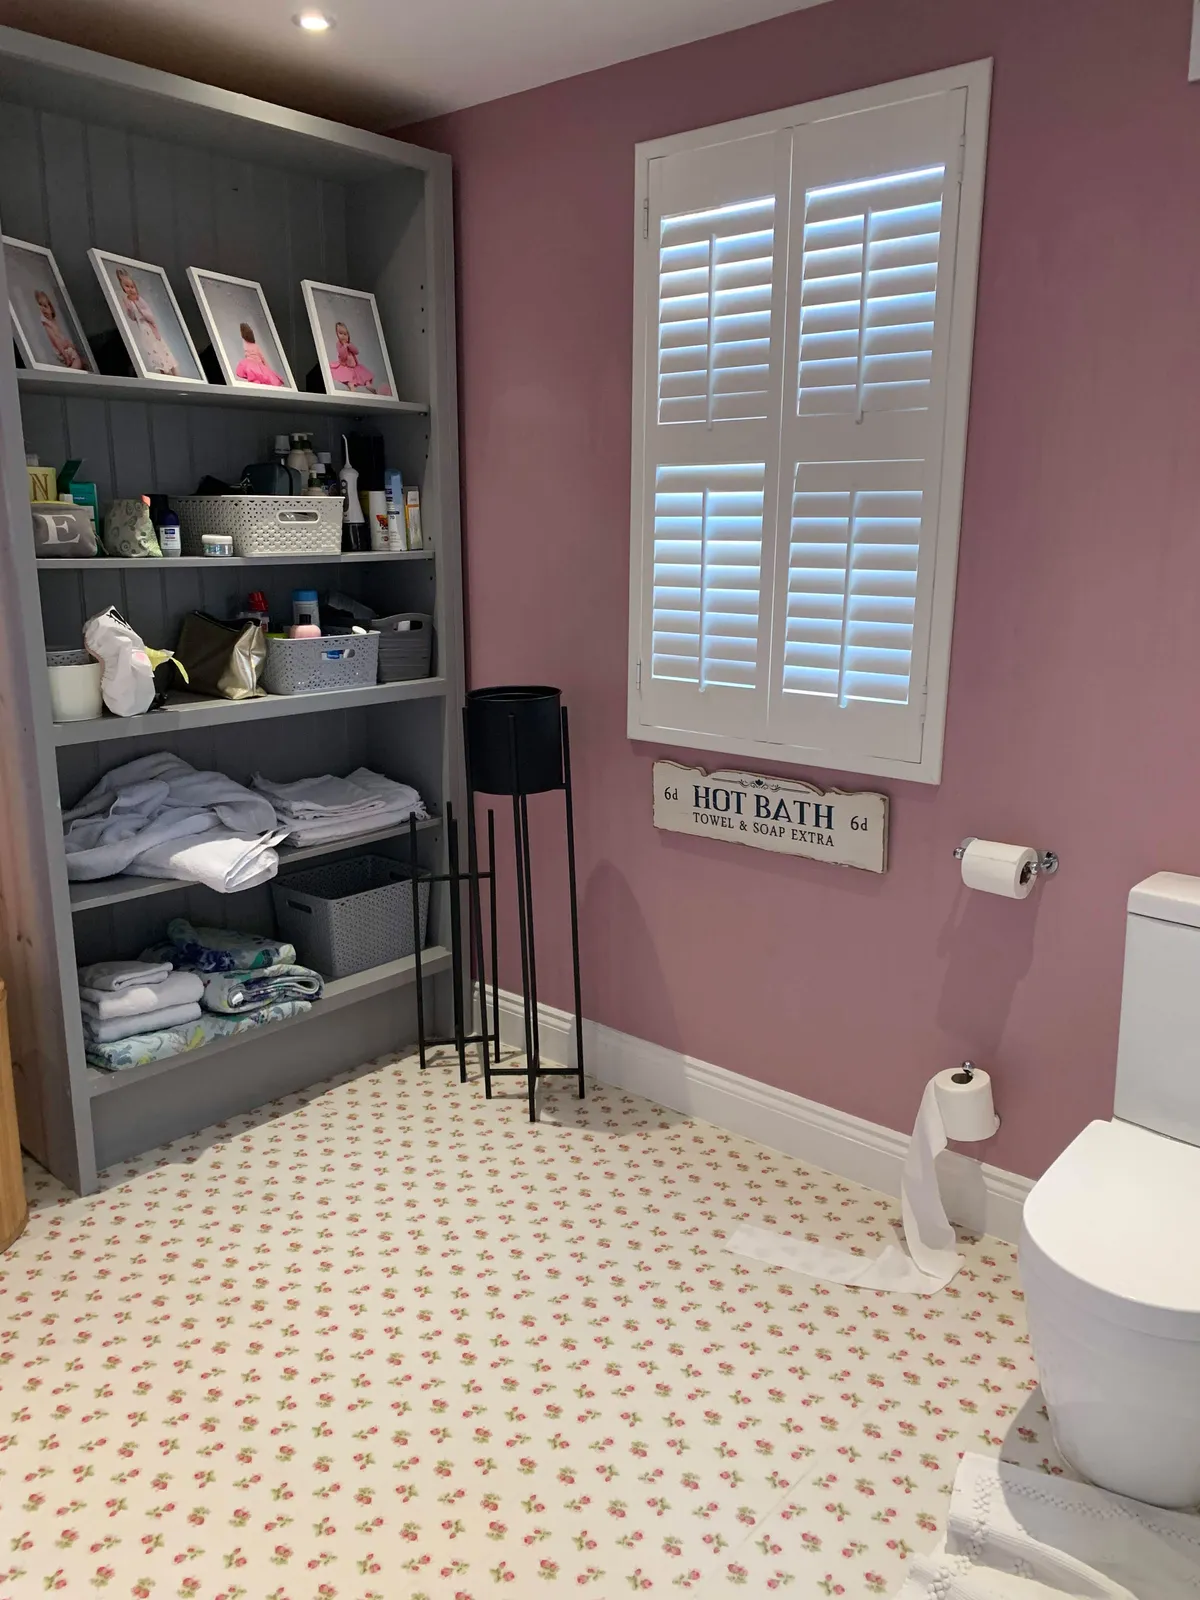 Bathroom makeover: 'I surprised my family with a sleek new bathroom'